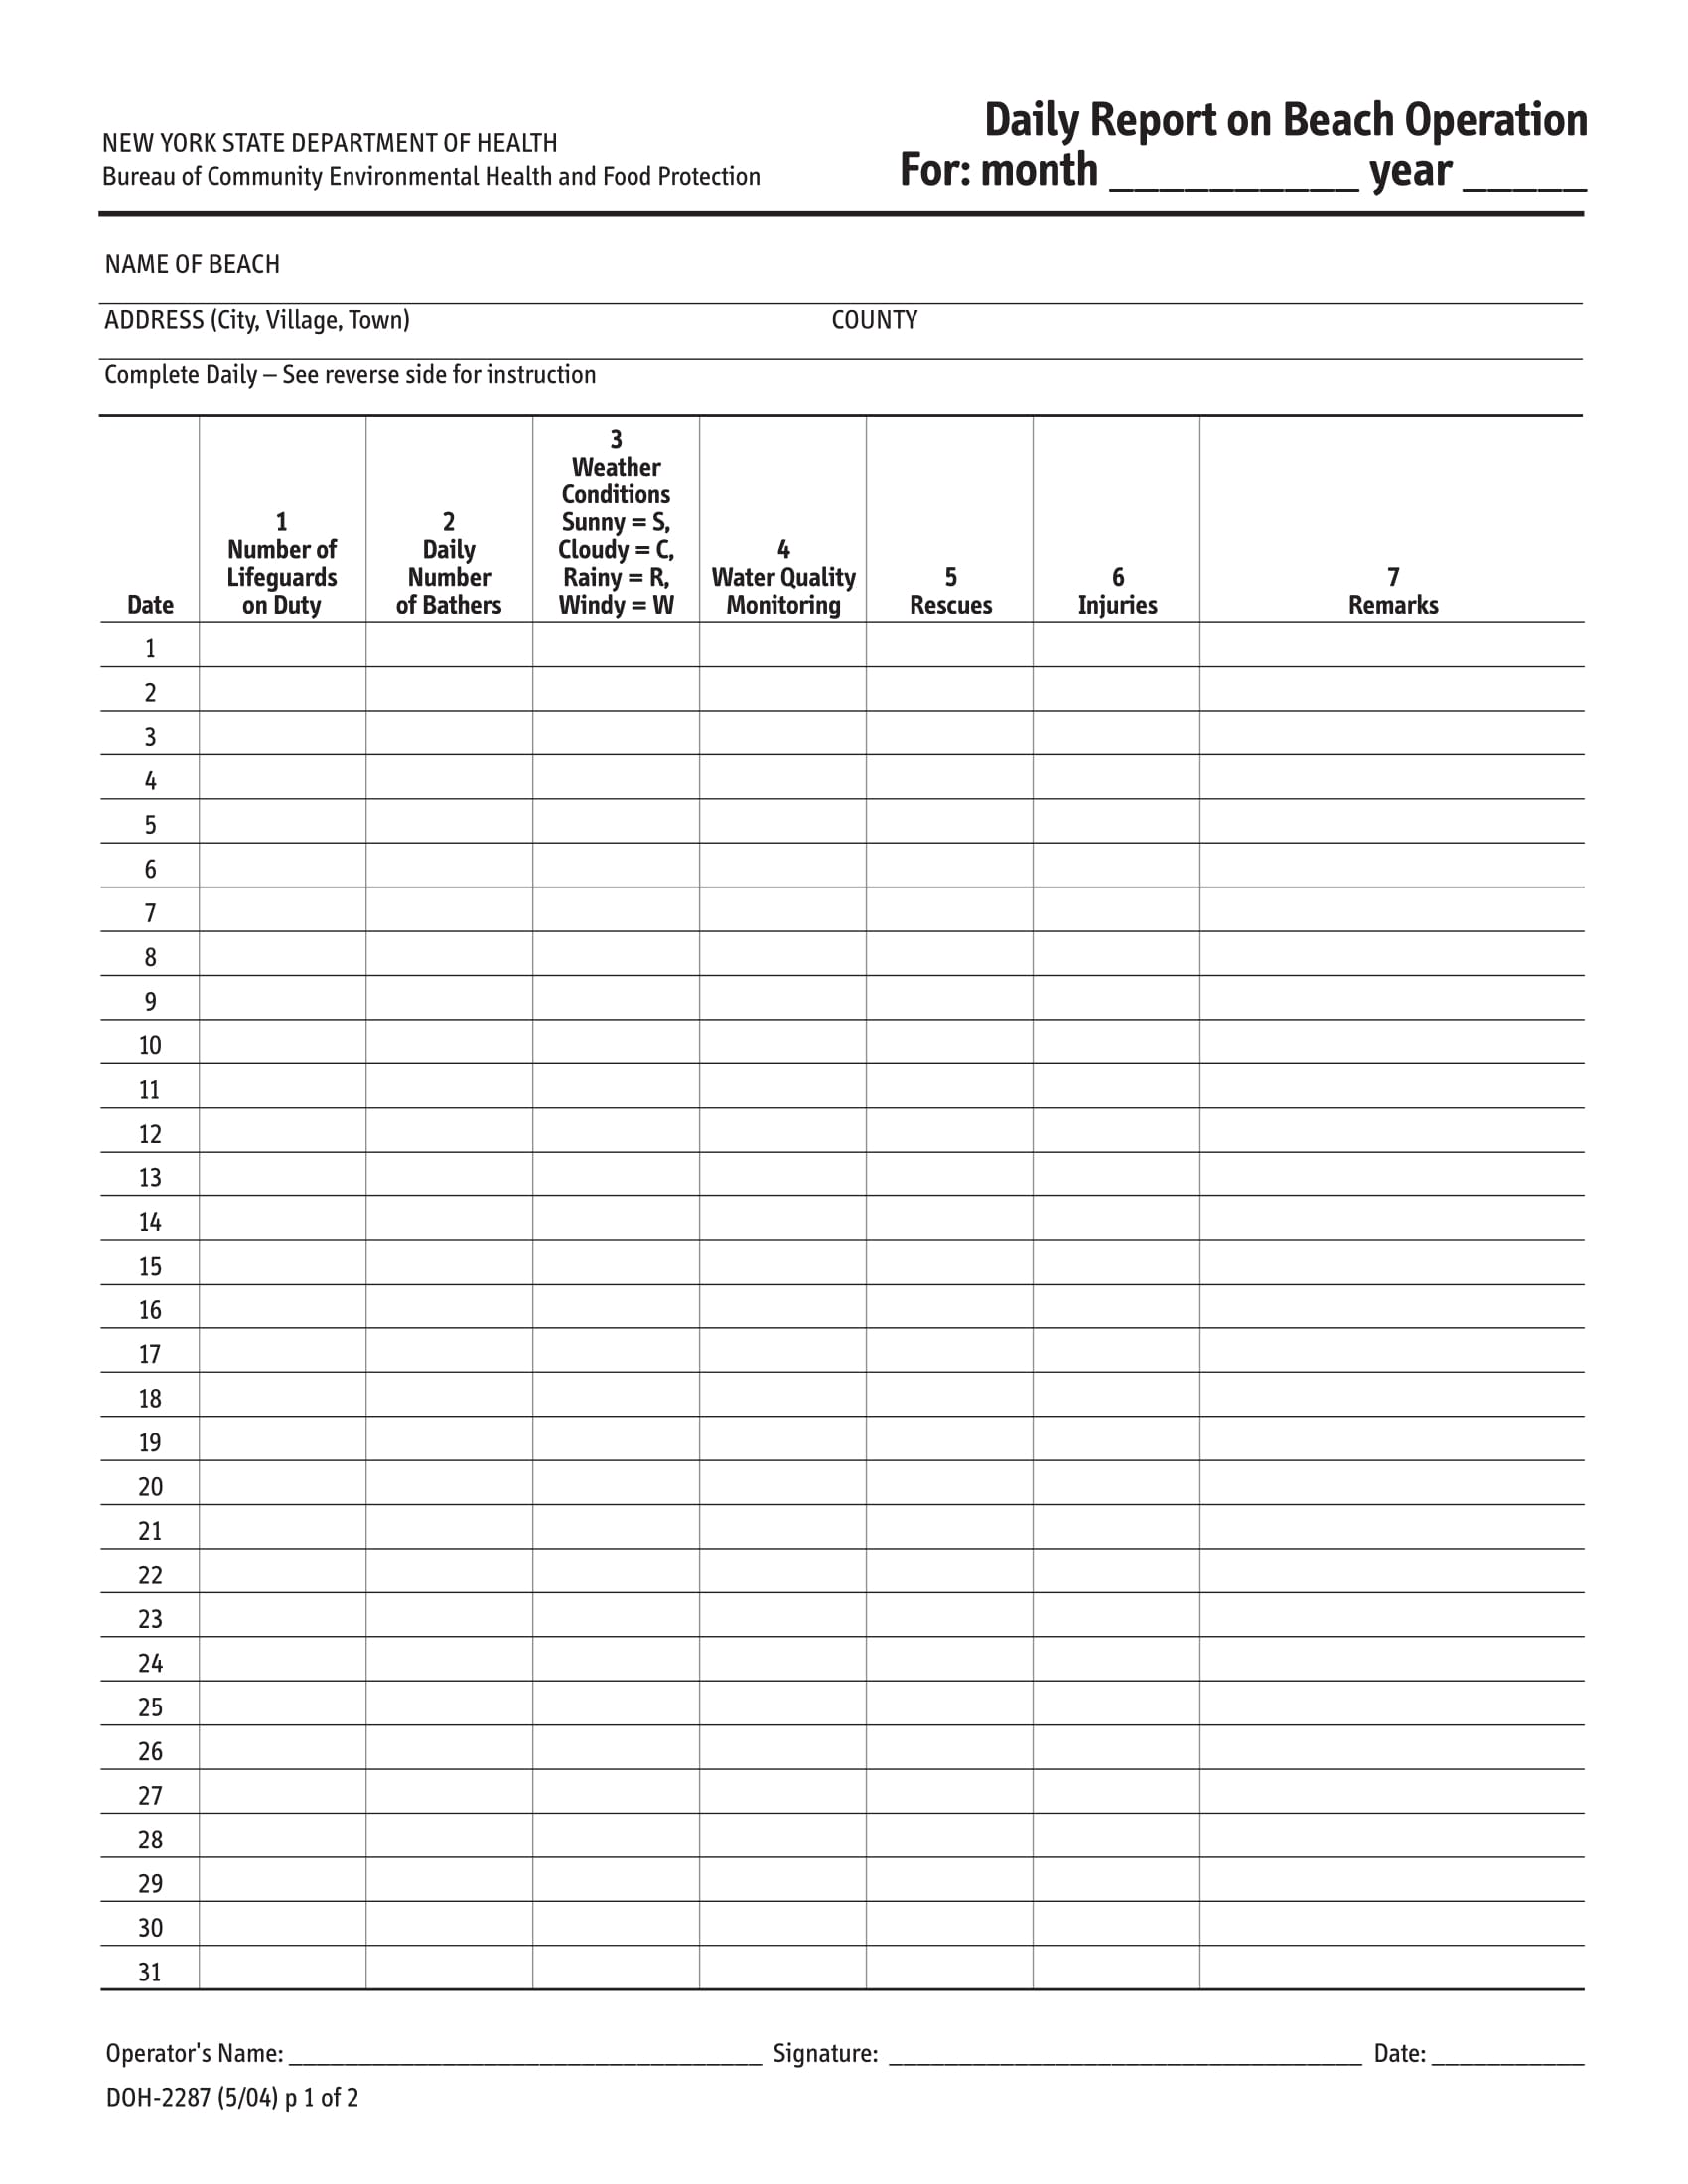 beach operation daily report form 1